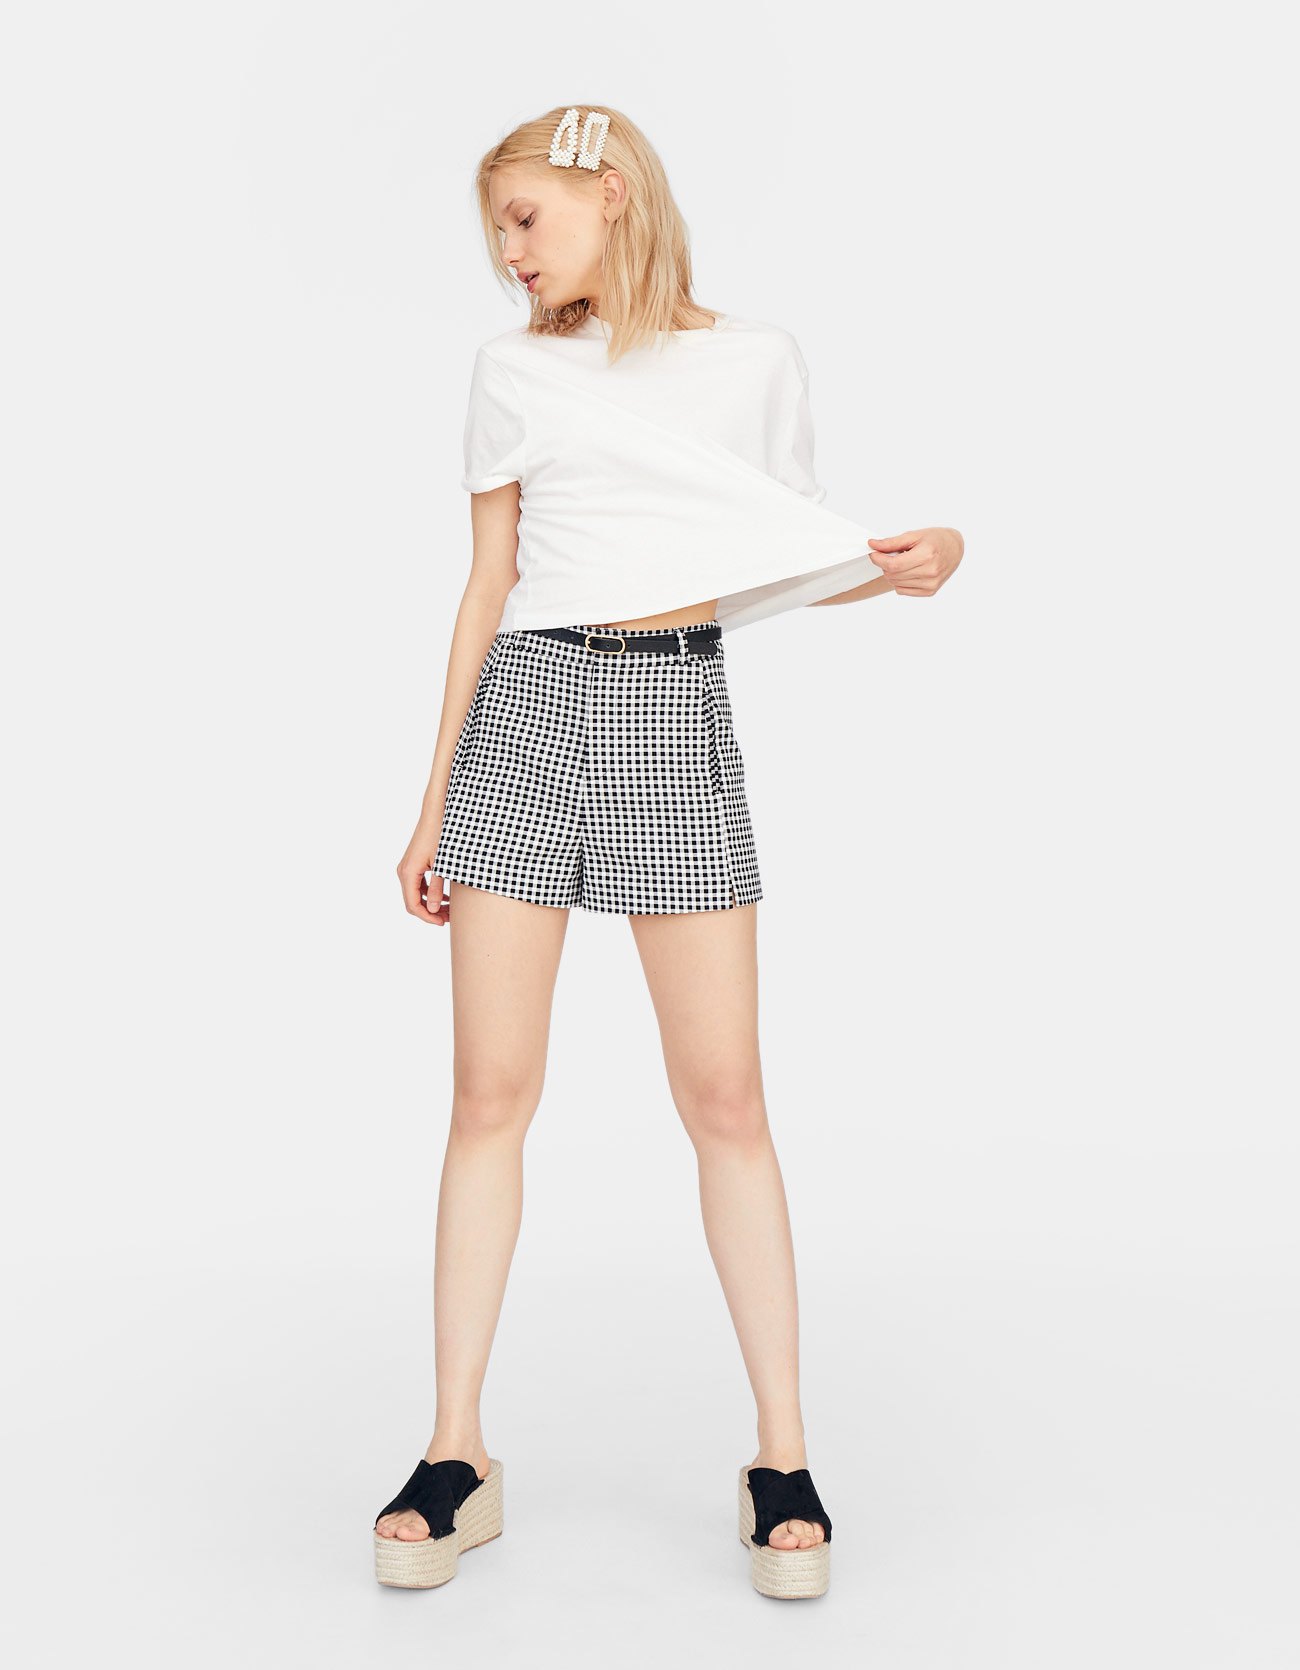 Stradivarius Cropped T-shirt at £5.99 | love the brands